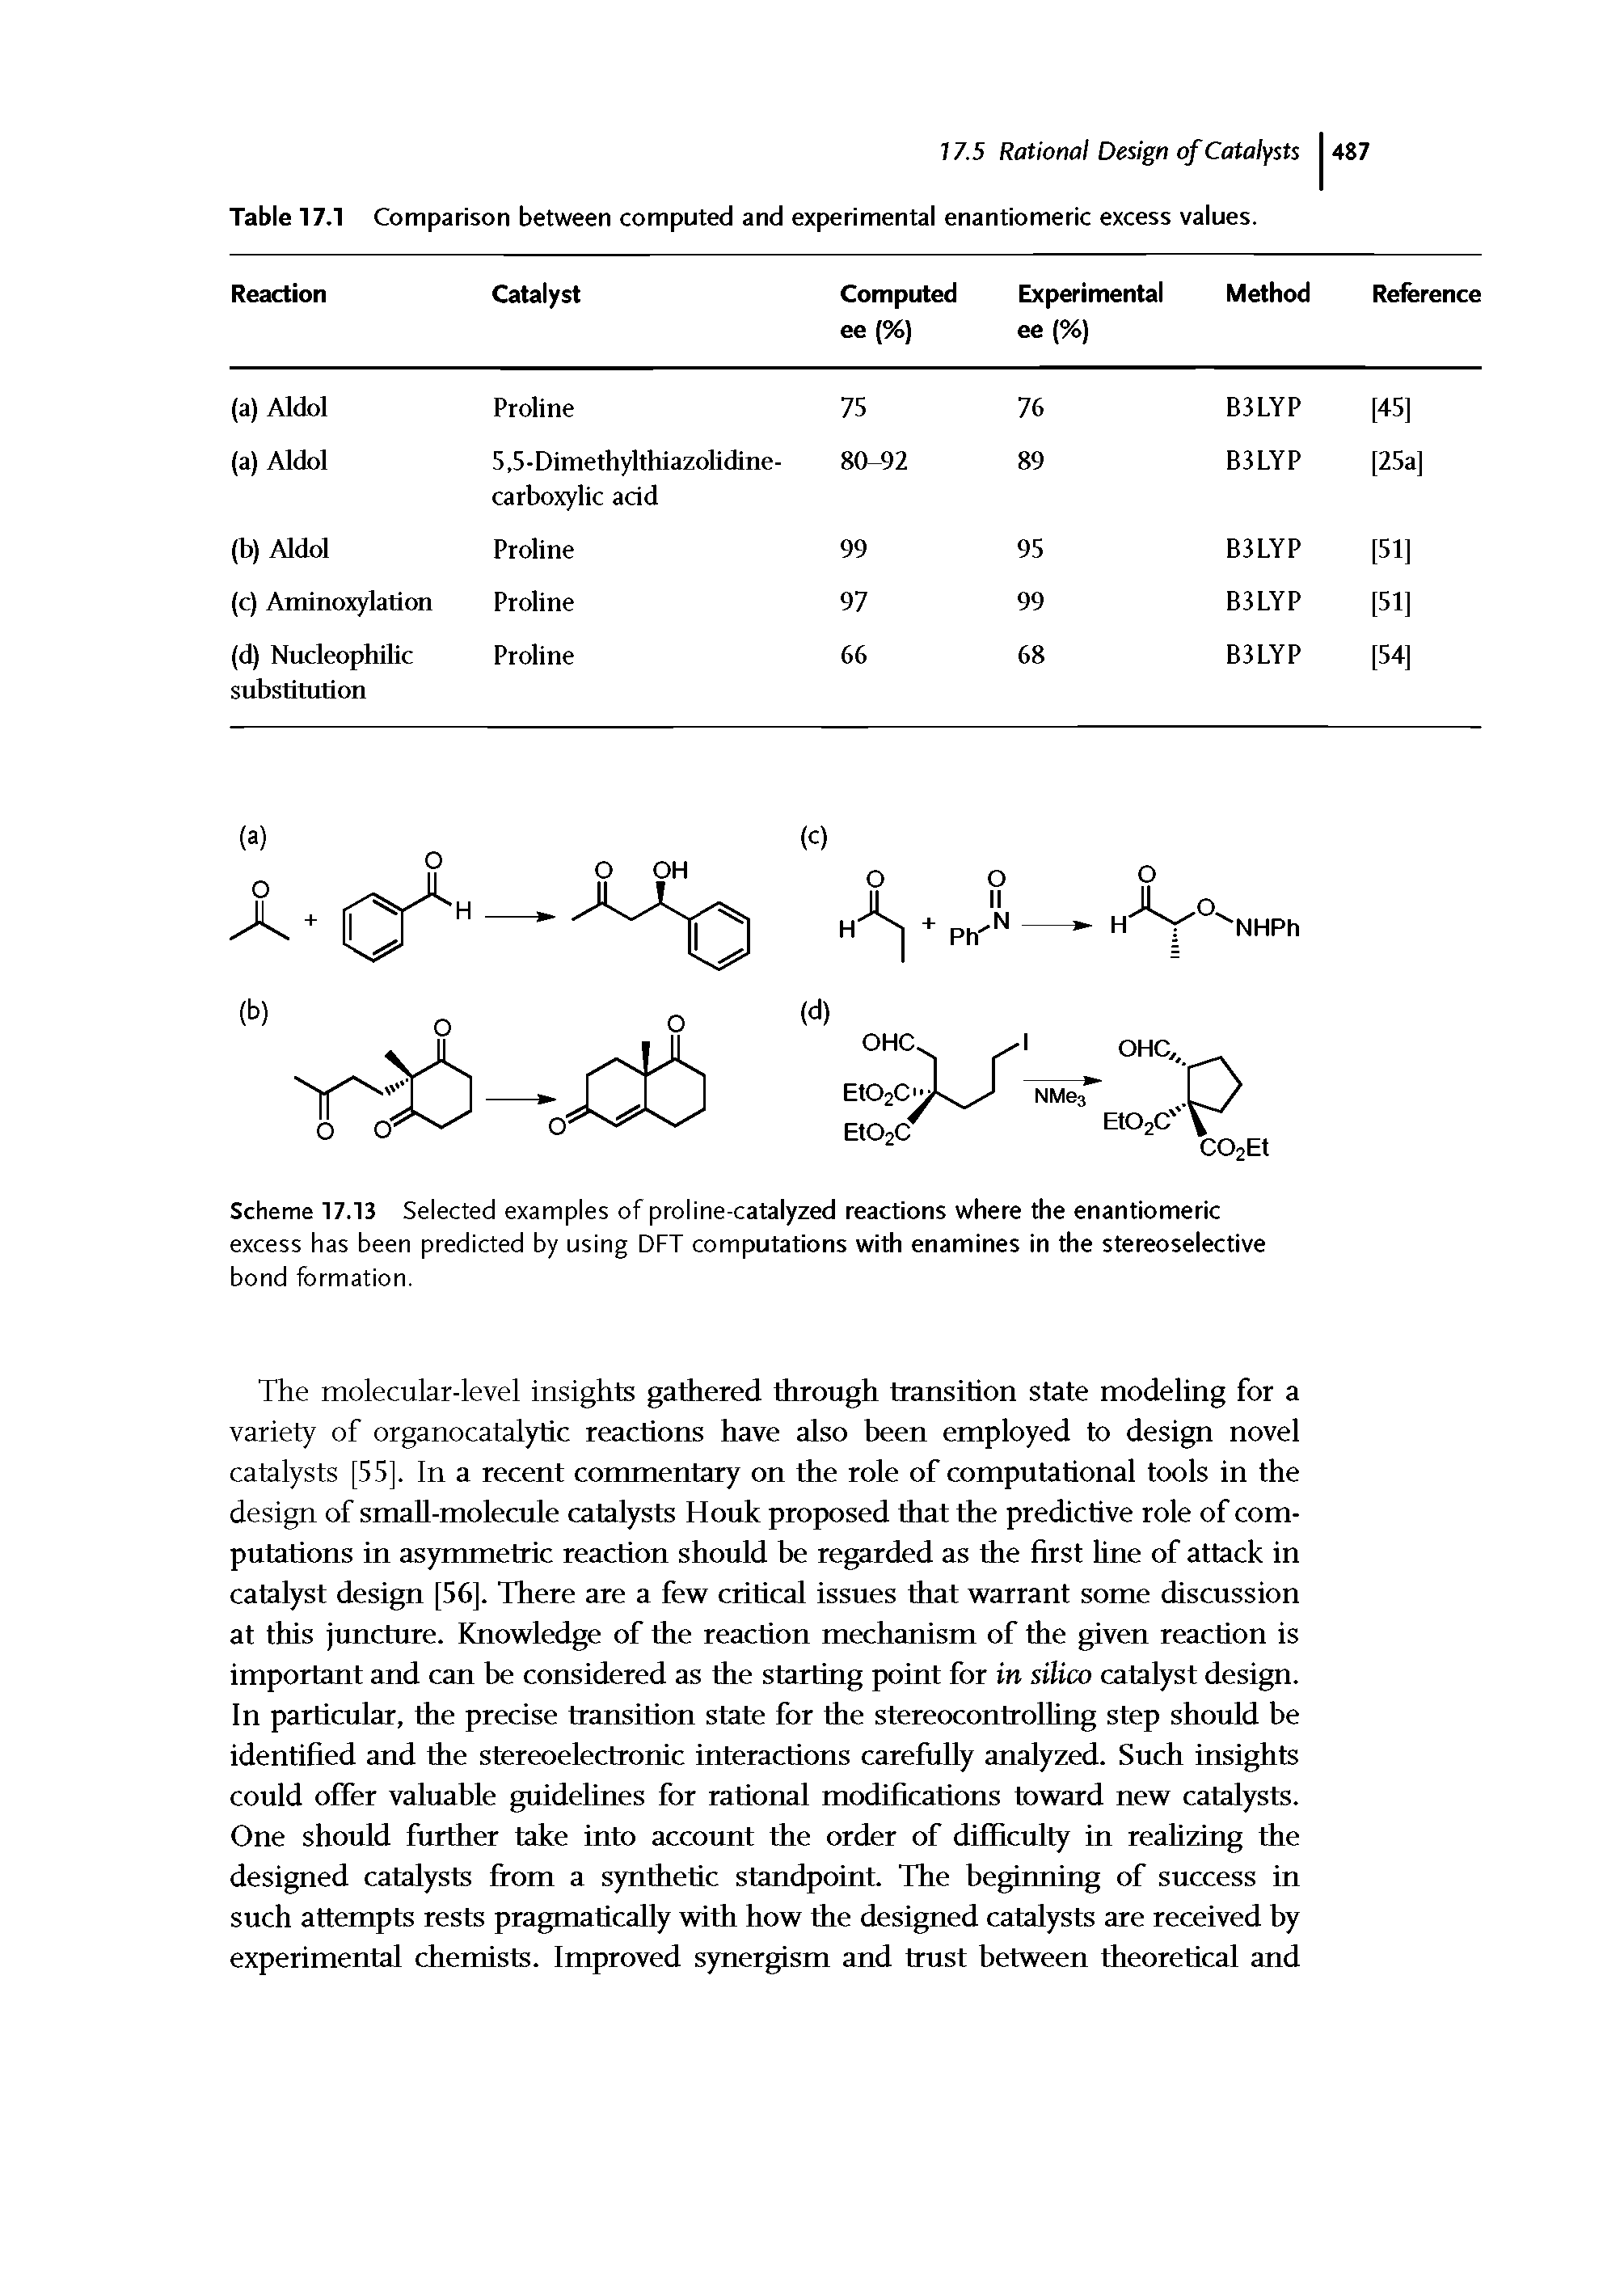 Scheme 17.13 Selected examples of proline-catalyzed reactions where the enantiomeric excess has been predicted by using DFT computations with enamines in the stereoselective bond formation.